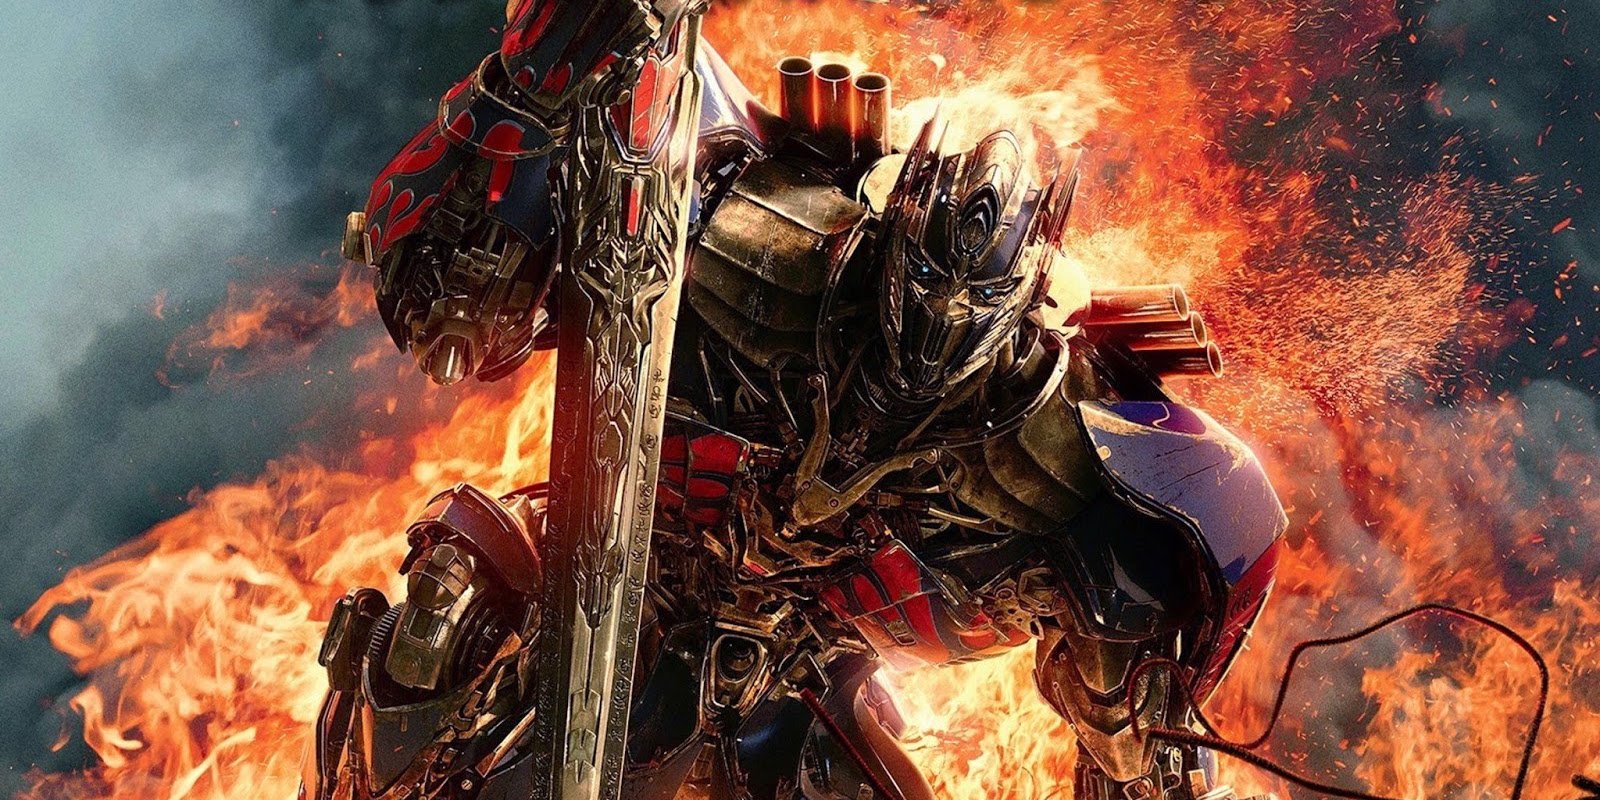 Review for the new action disaster film TRANSFORMERS: THE LAST KNIGHT, now playing in theatres. | Review for the new action disaster film TRANSFORMERS: THE LAST KNIGHT, now playing in theatres.